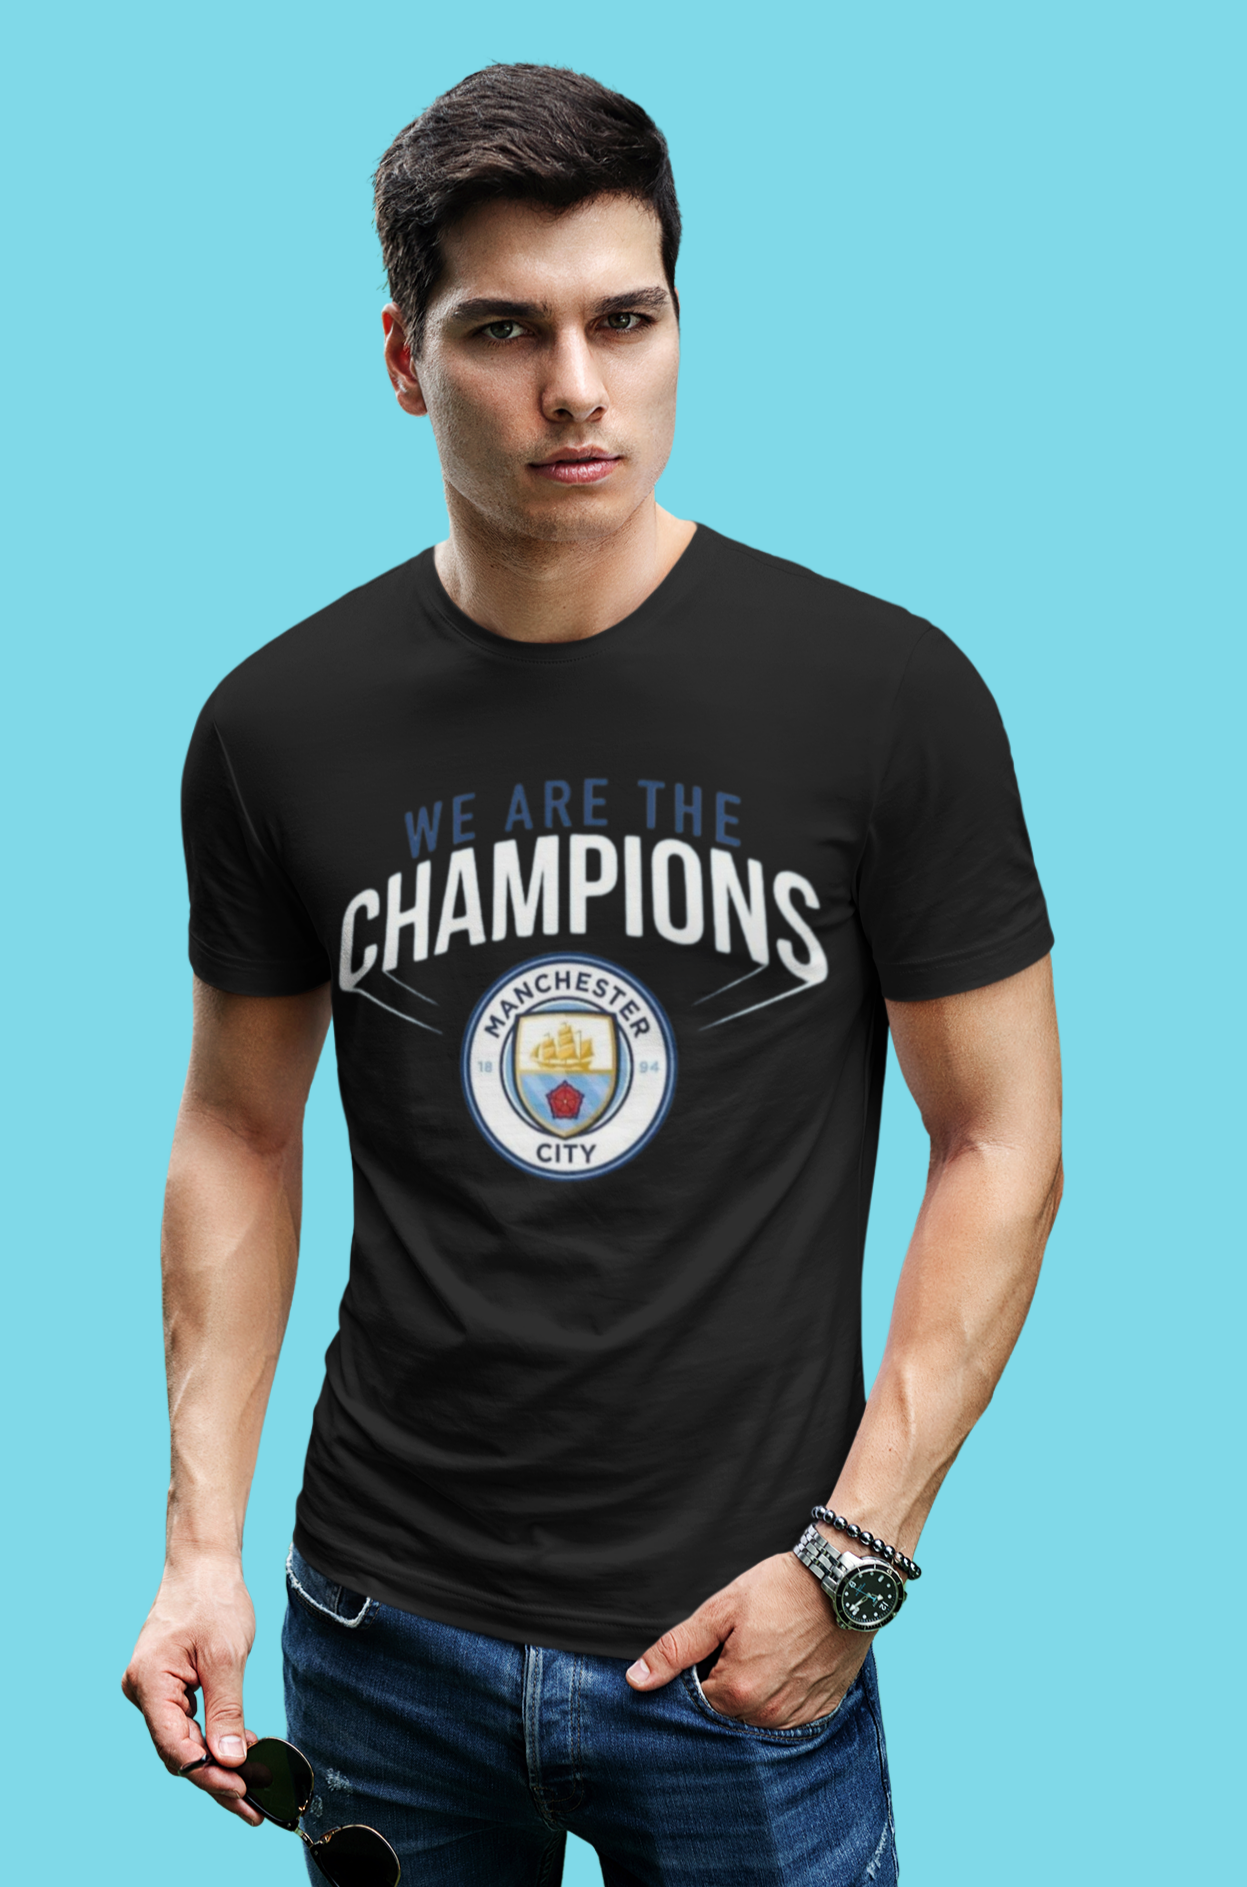 We are champions (black)T-shirt